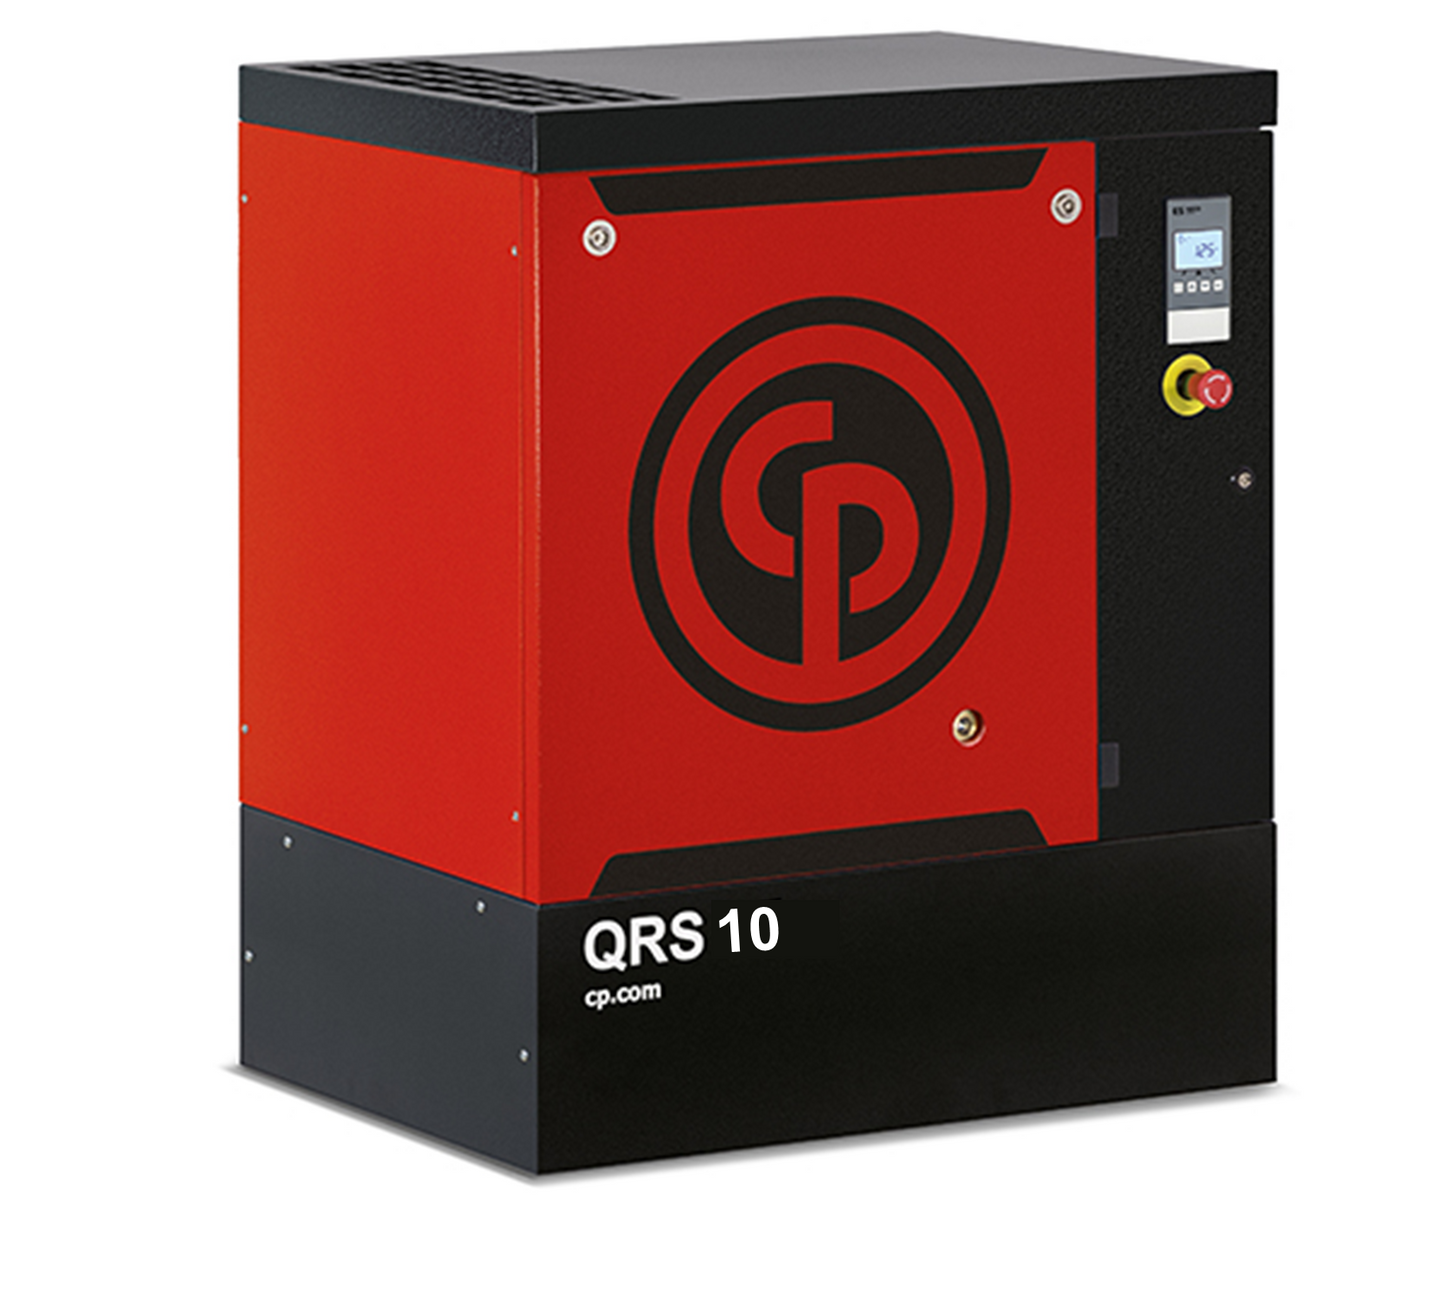 Chicago Pneumatic QRS 10 HP Base Mount Rotary Screw Air Compressor | 31.2 CFM@150 PSI, 208-230/460 volt, 3 Phase | 4152022913